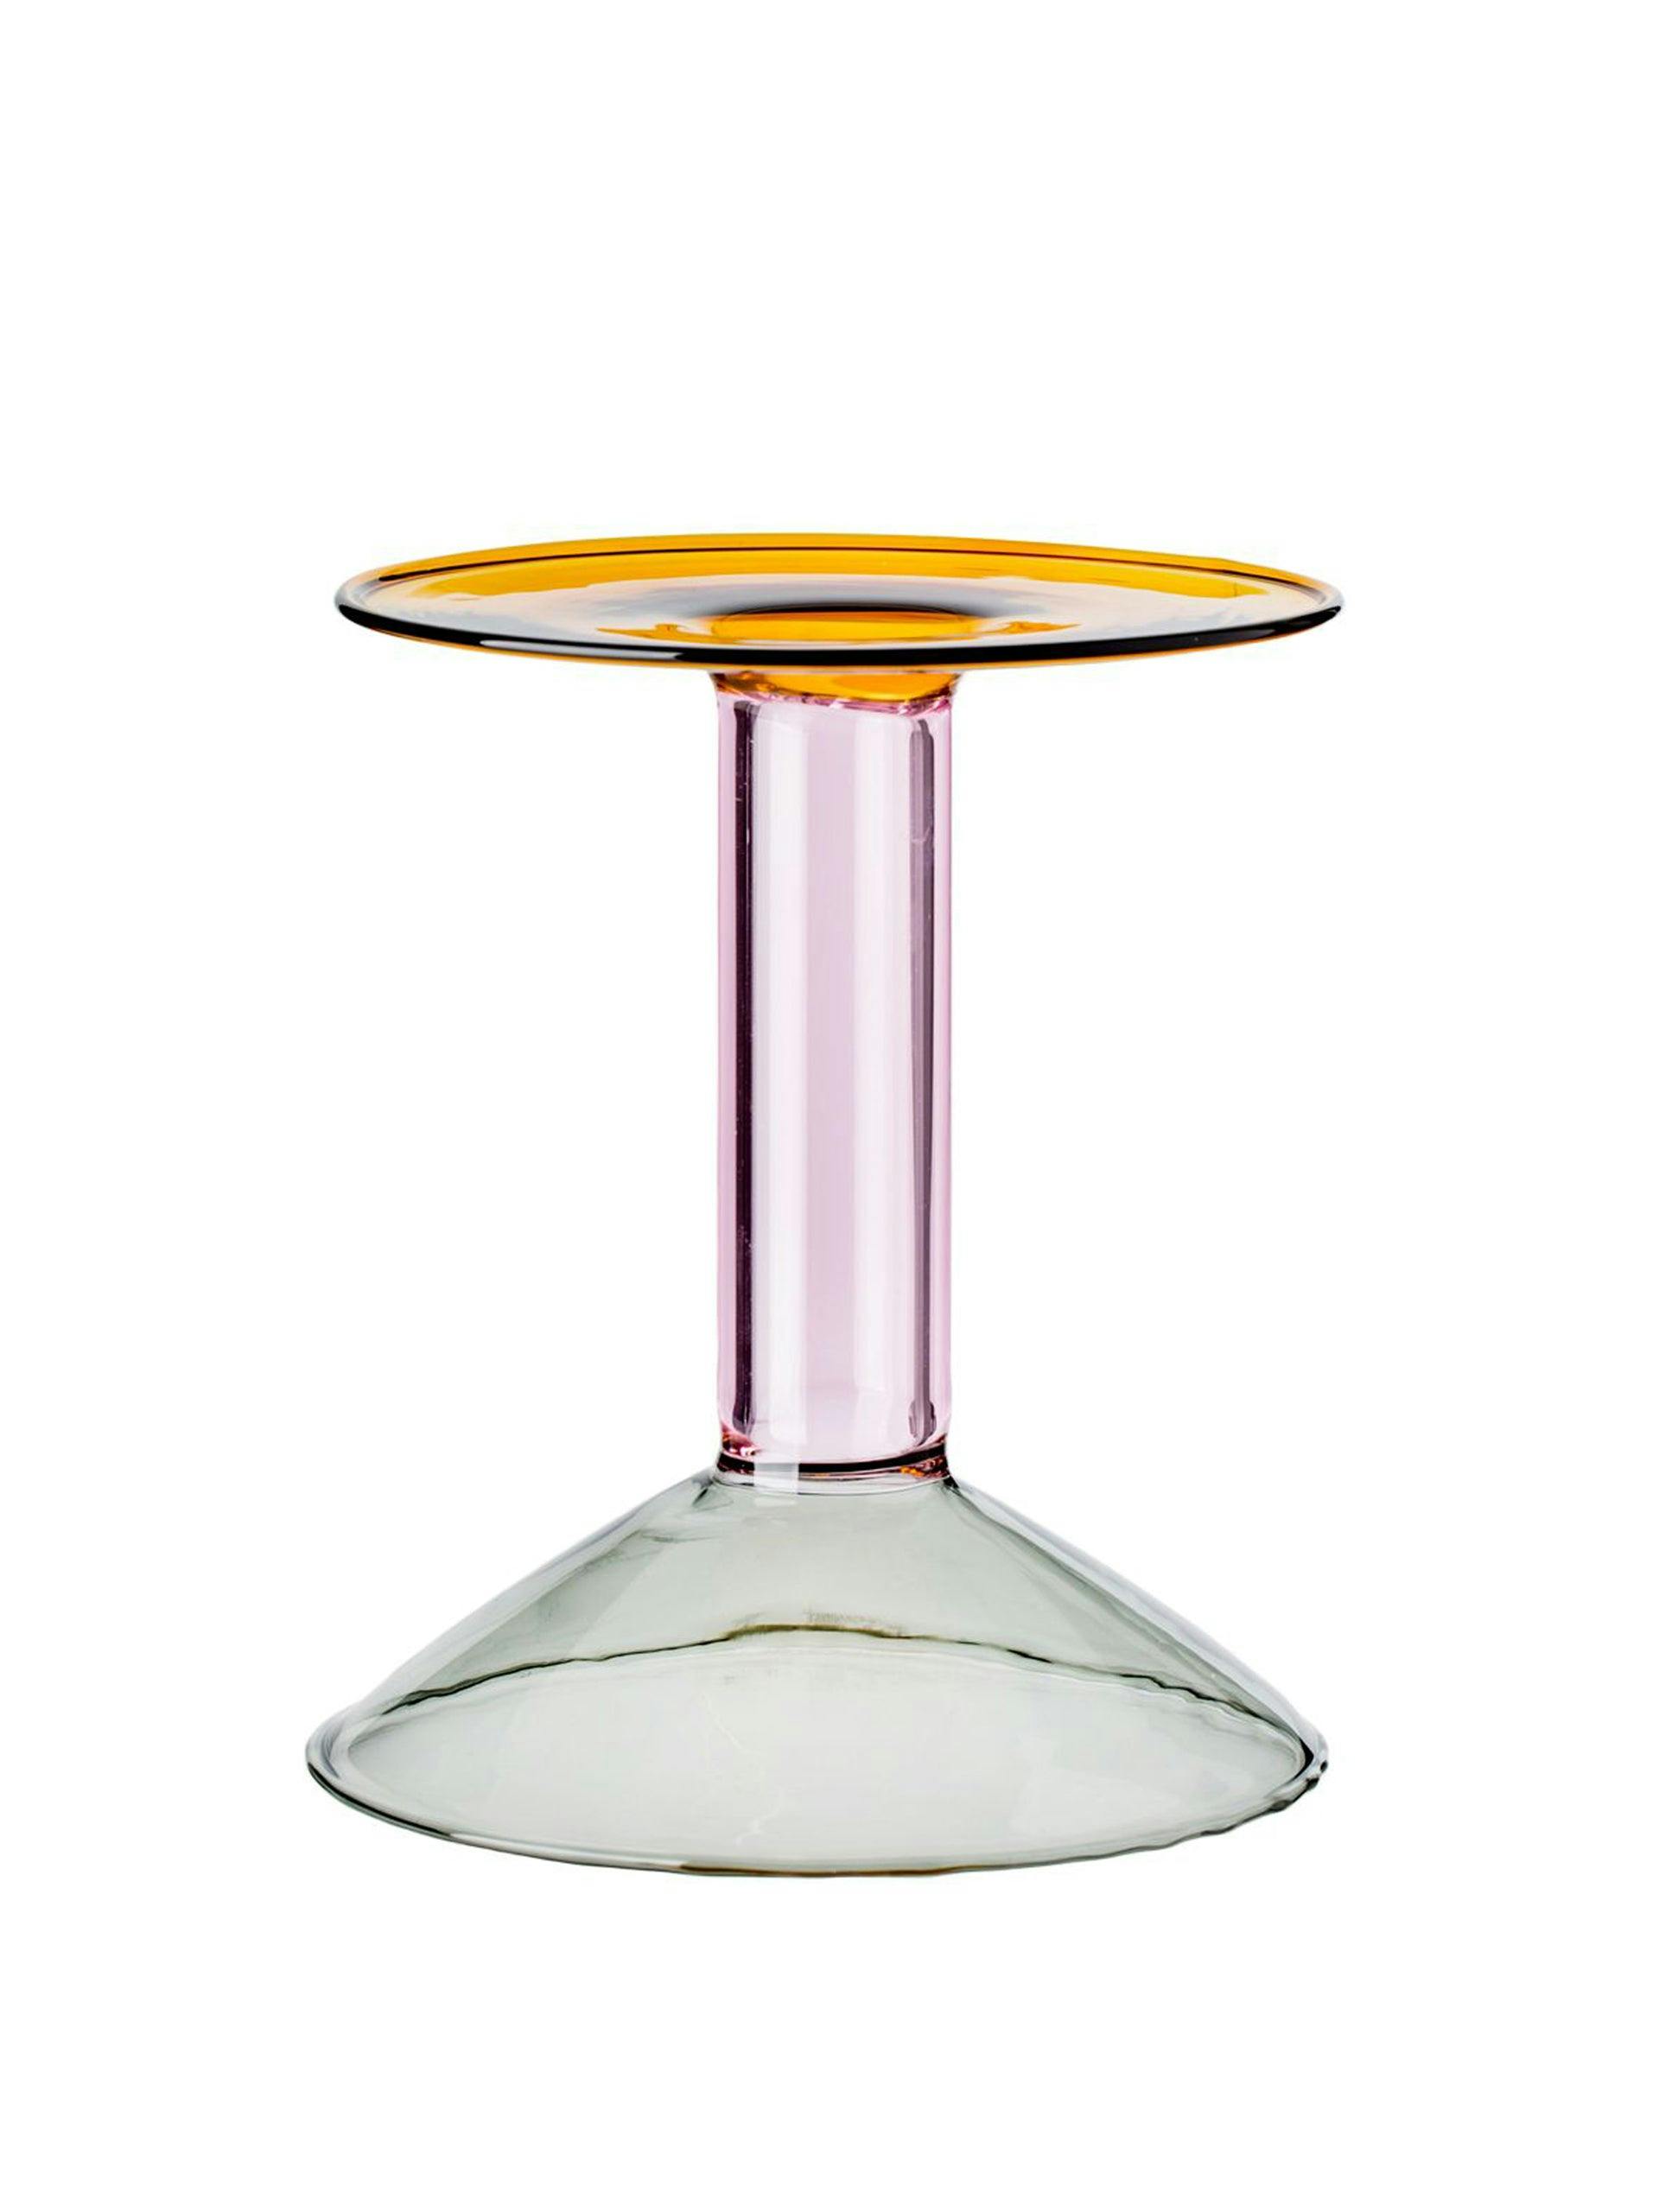 Vibrant glass candle holder